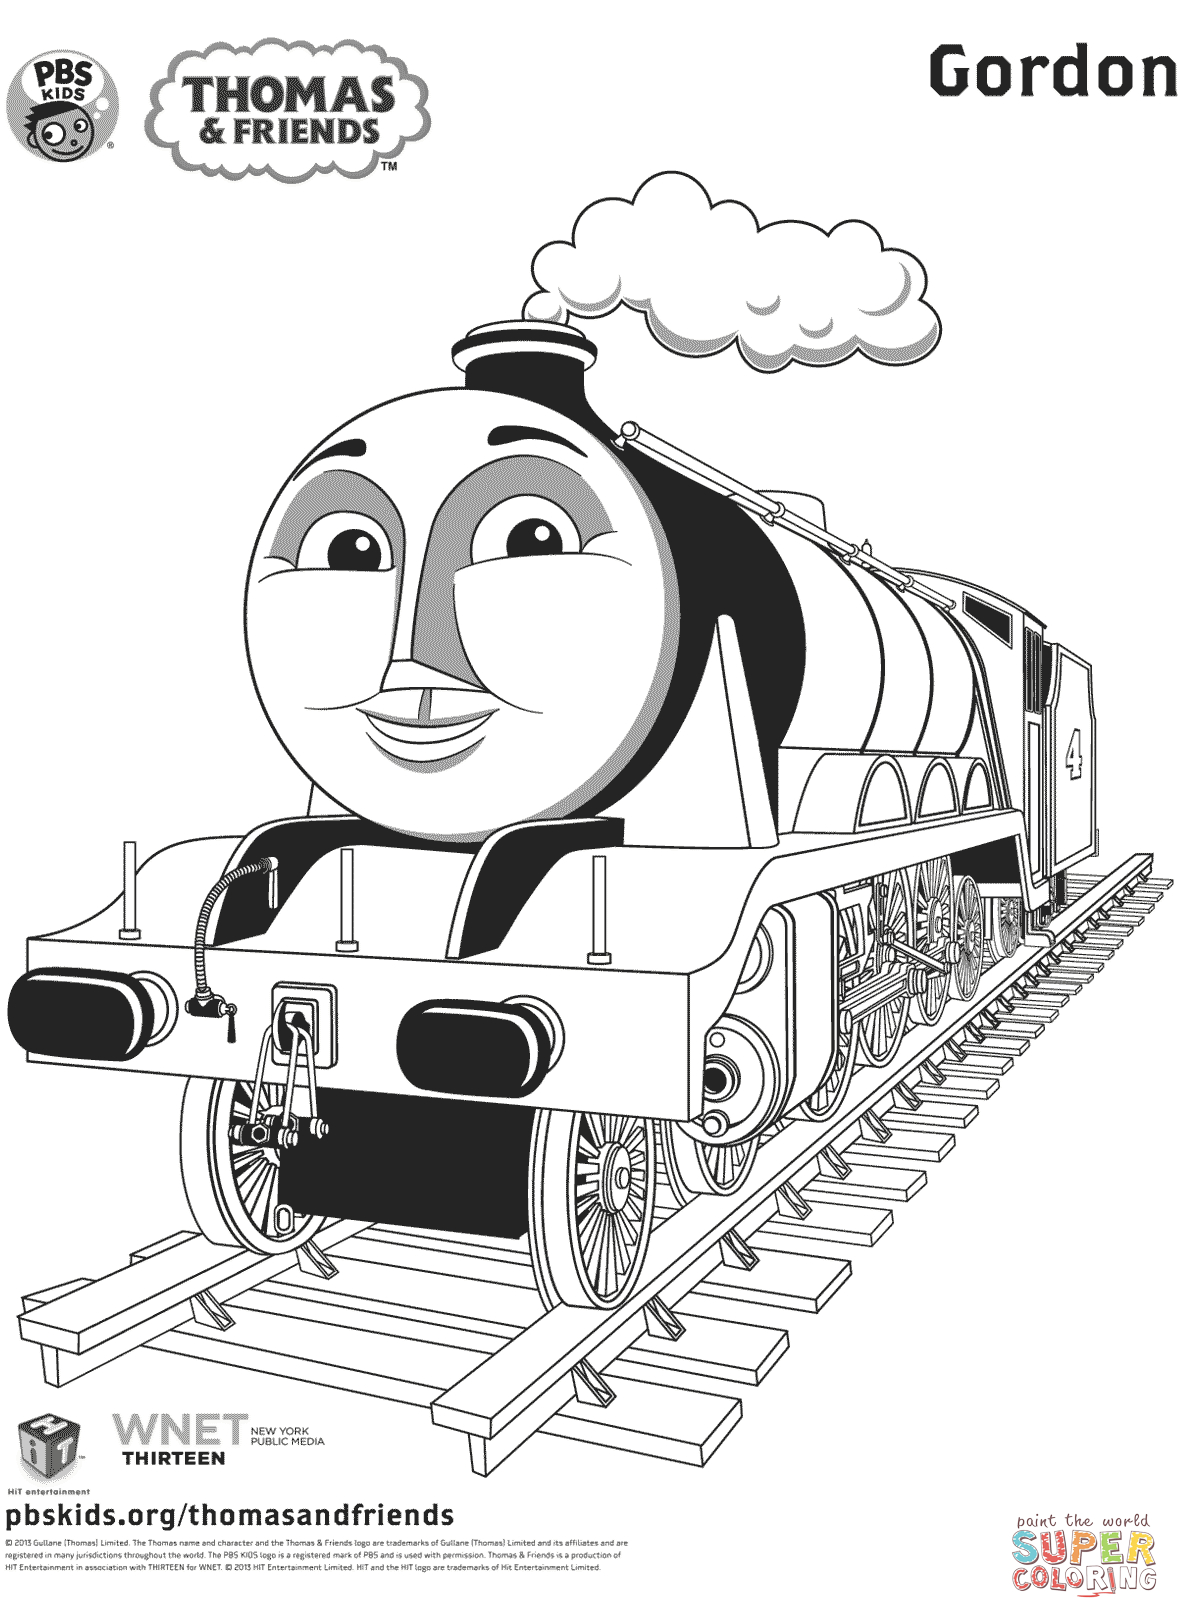 Thomas Coloring Pages Printable Gordon From Thomas Friends Coloring Page Free Printable Coloring